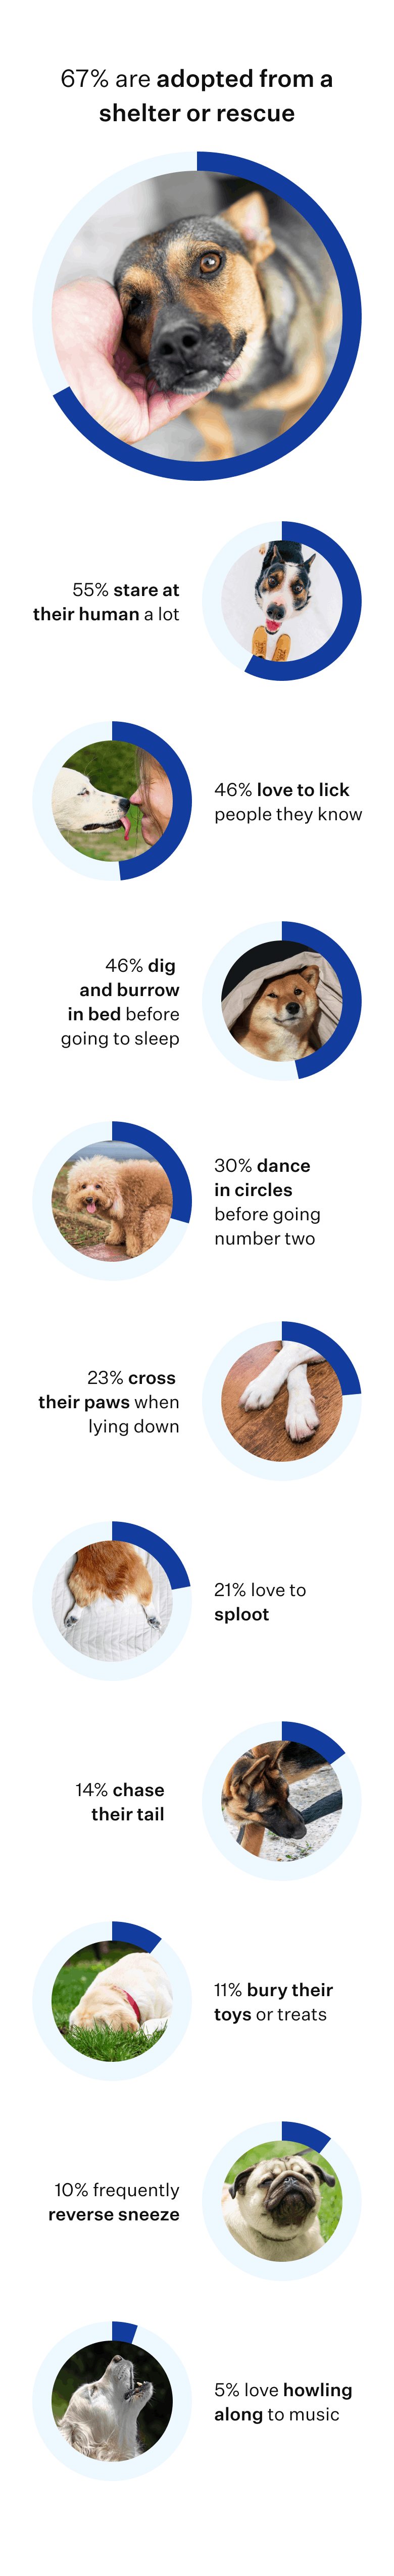 67% are adopted from a shelter or rescue, 55% stare at their human a lot, 46% love to lick people they know, 46% dig and burrow in bed before going to sleep, 30% dance in circles before going number two, 23% cross their paws when lying down, 21% love to sploot, 14% chase their tail , 11% bury their toys or treats, 10.6% frequently reverse sneeze, and 5% love howling along to music.